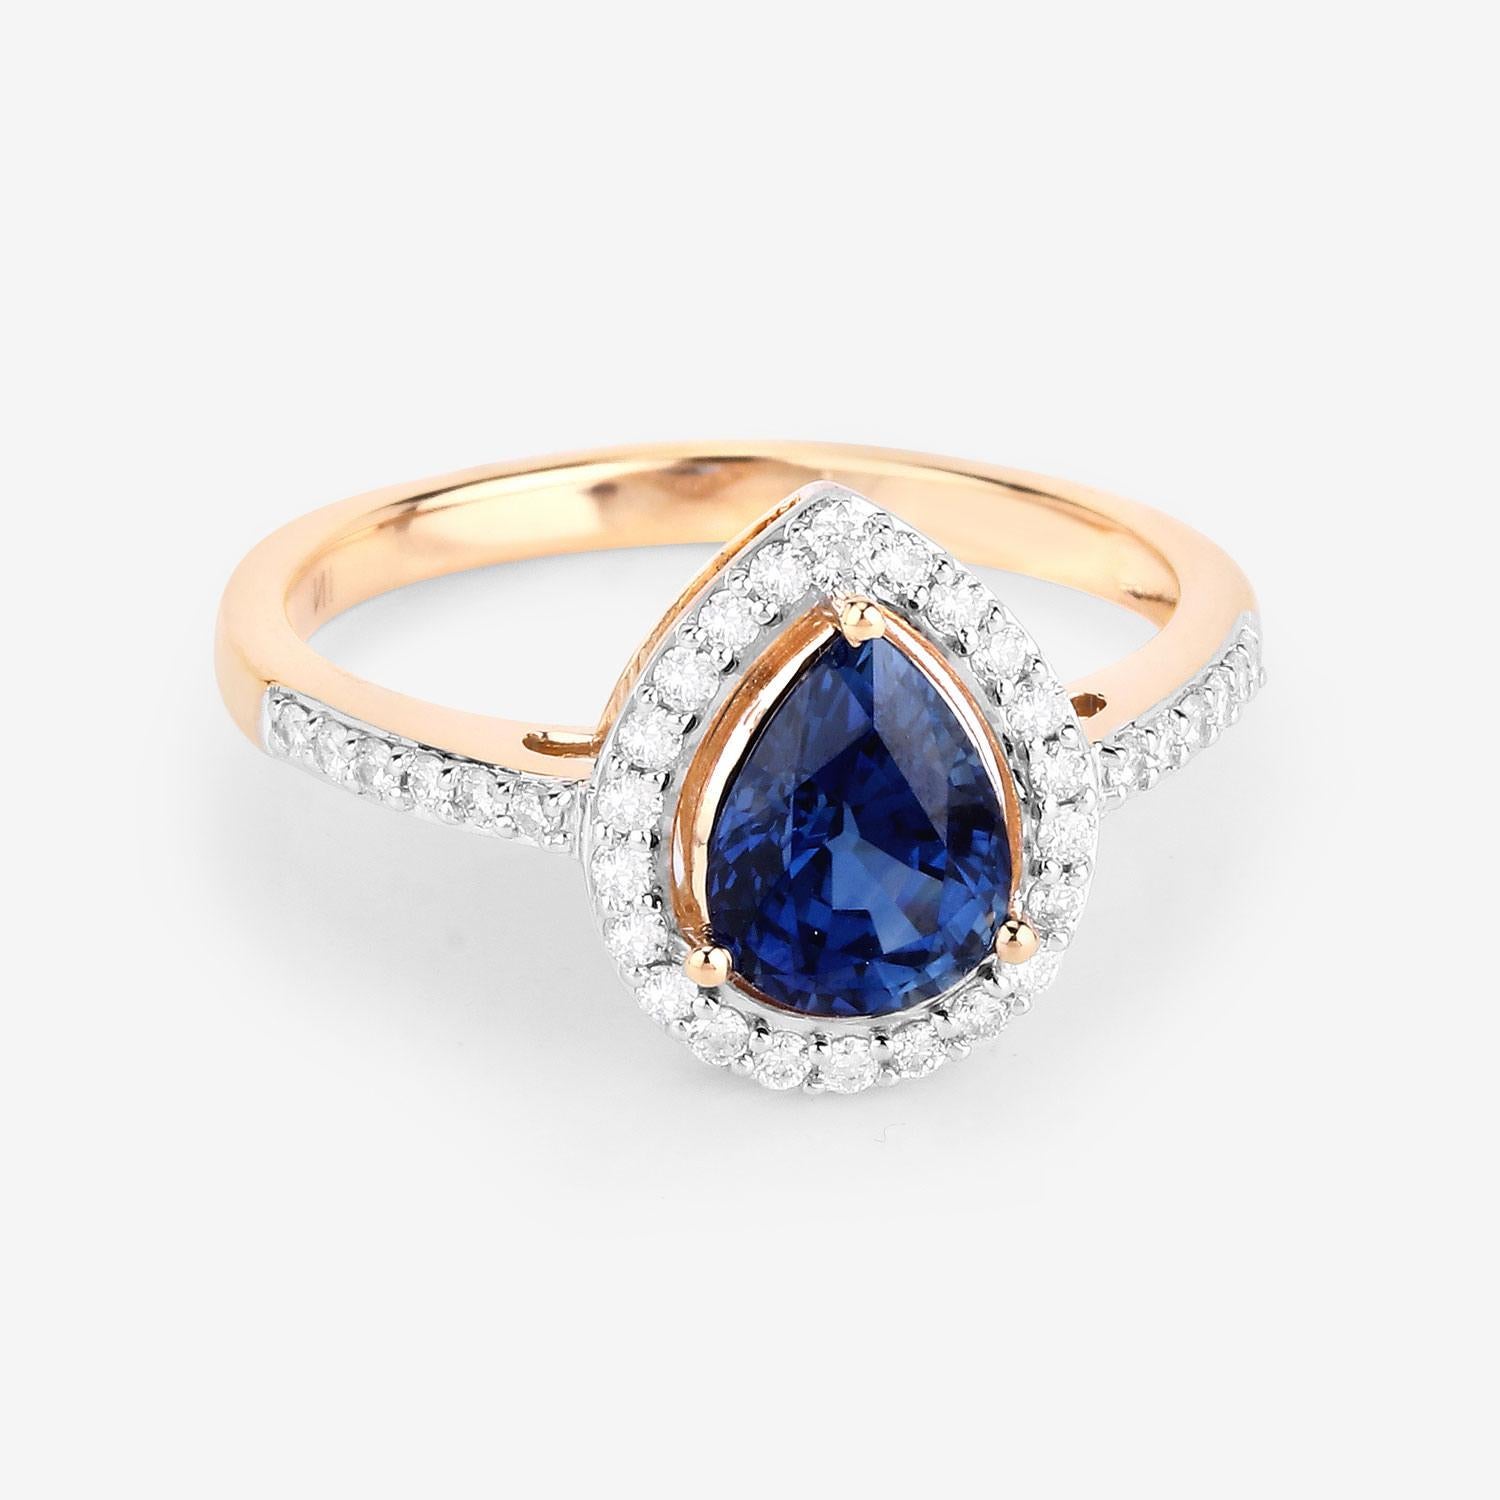 Pear Shape Vivid Blue Sapphire & Diamond 14k Yellow Gold Ring In Excellent Condition For Sale In Laguna Niguel, CA